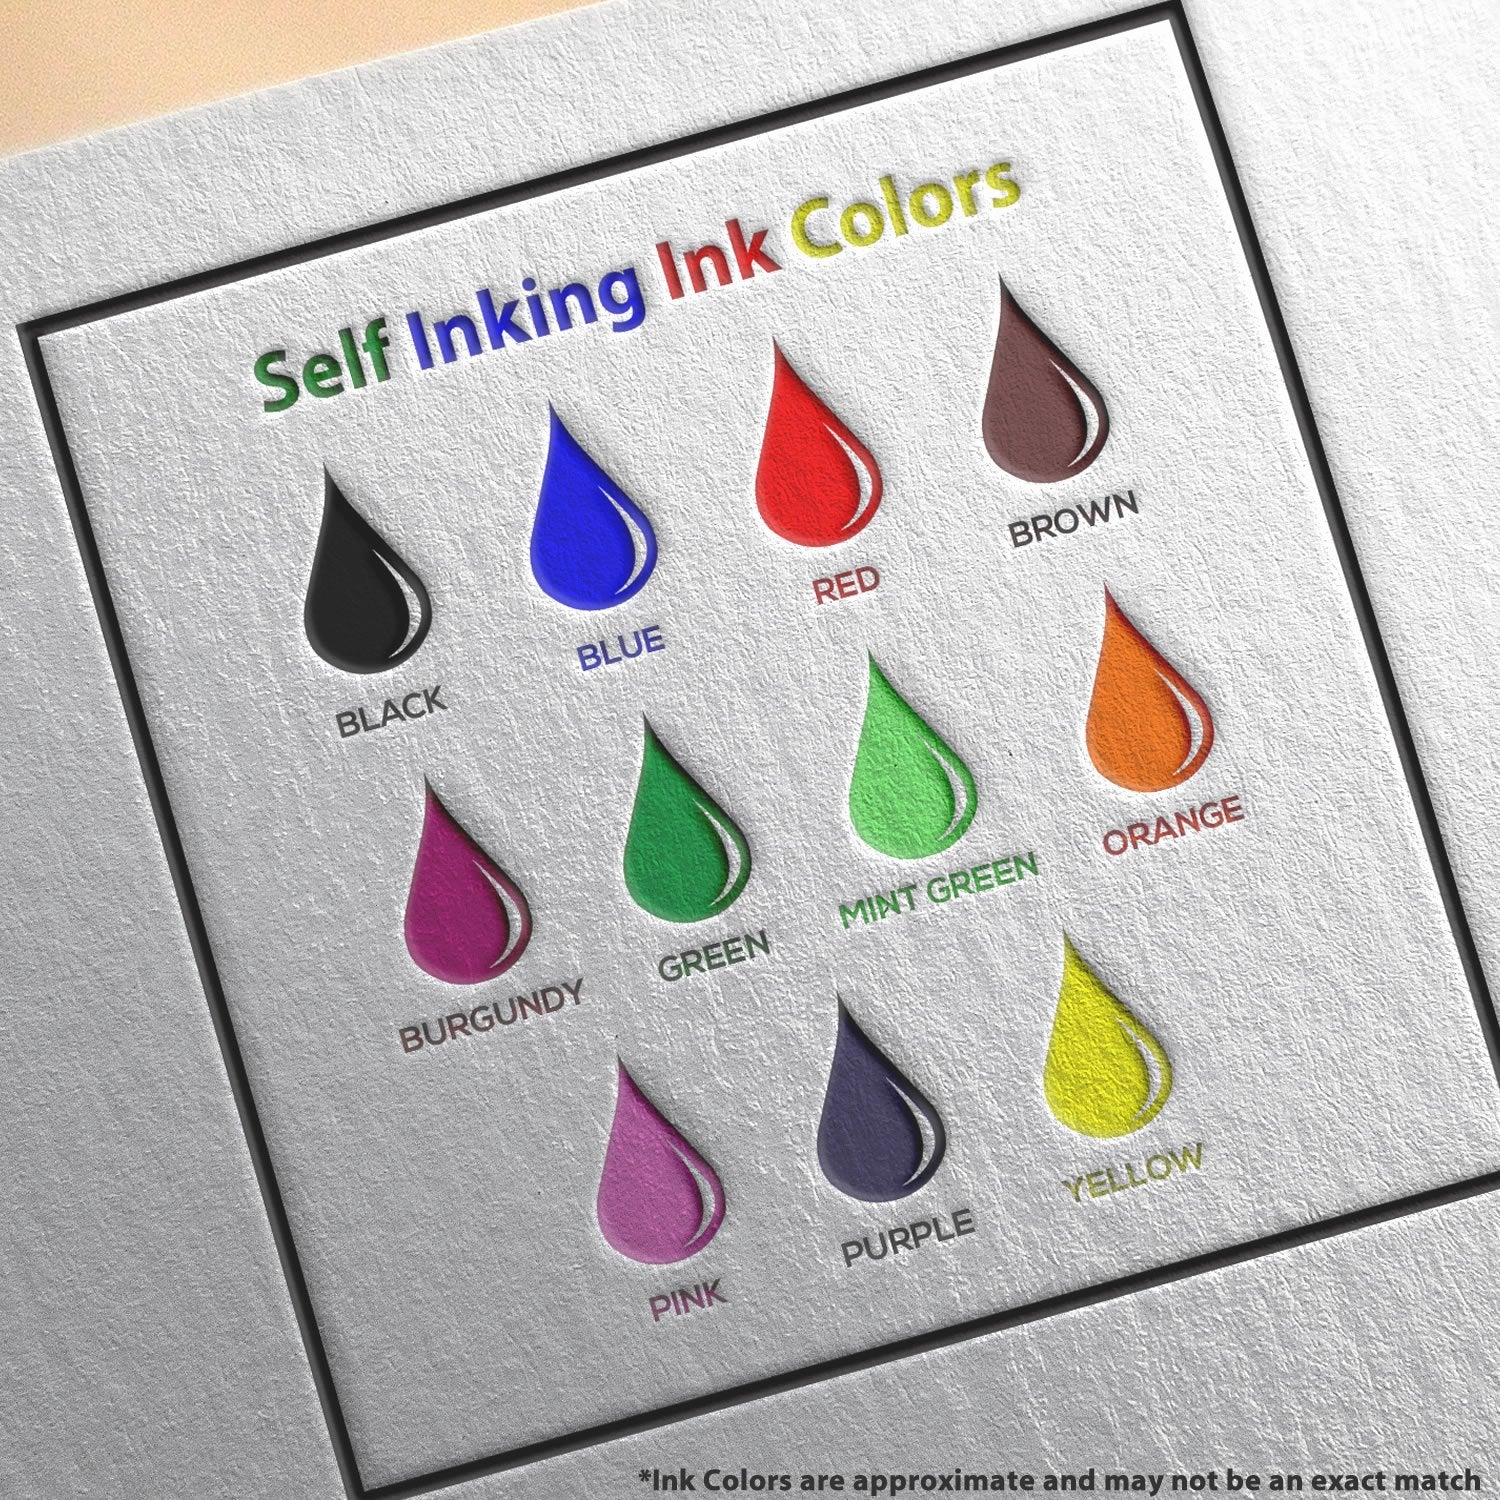 Self-Inking Round Ok'd By Stamp Ink Color Options